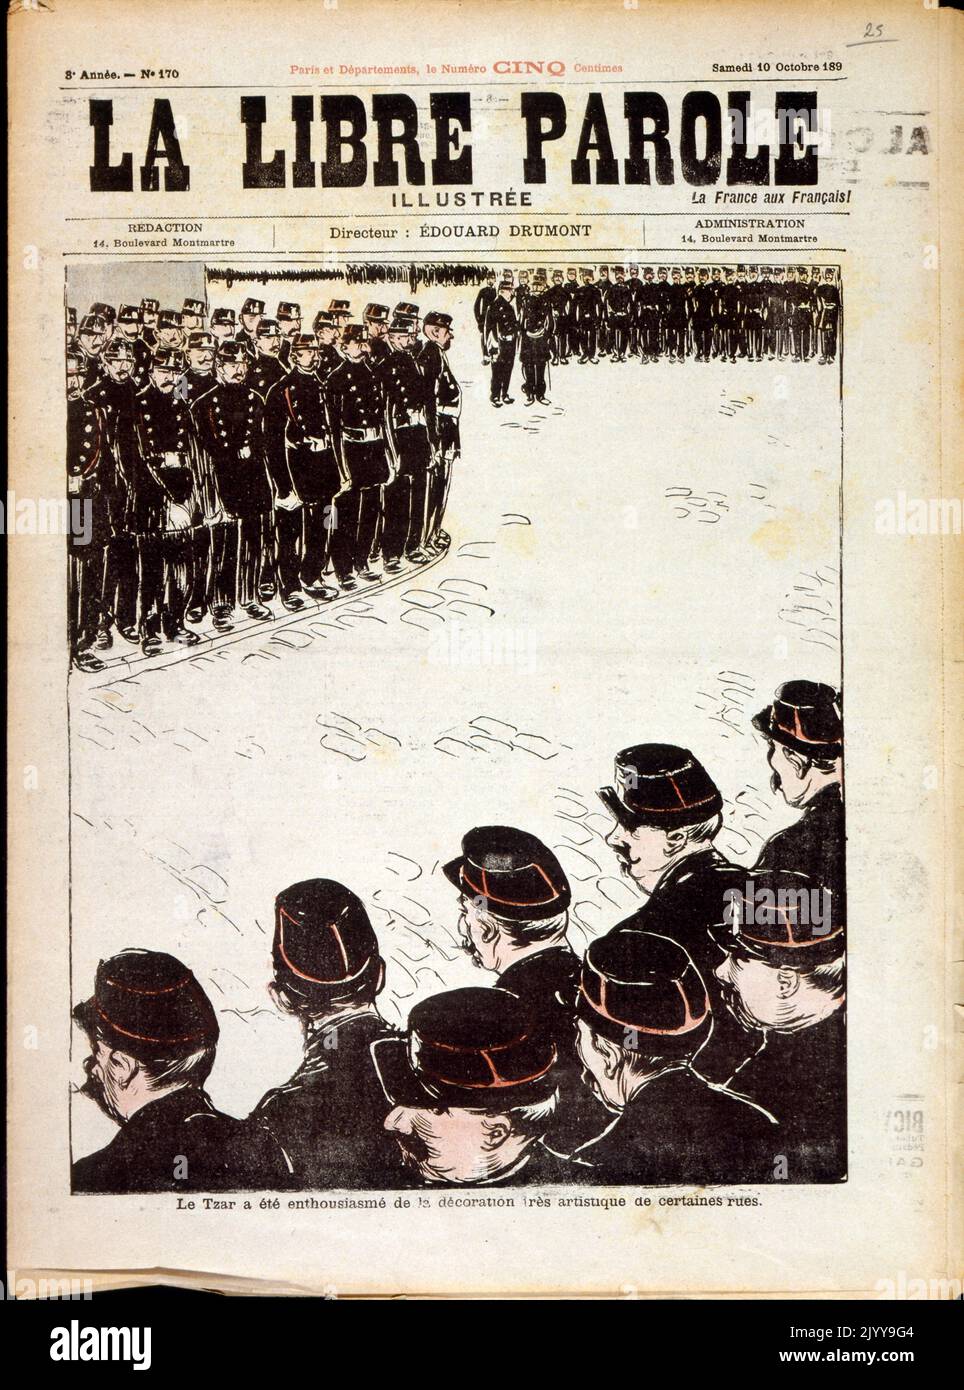 Coloured Illustration of troops lining the streets entitled 'The Tsar has been enthusiastic about the artistic decoration of certain streets'. Dated 10 October 1899 Stock Photo